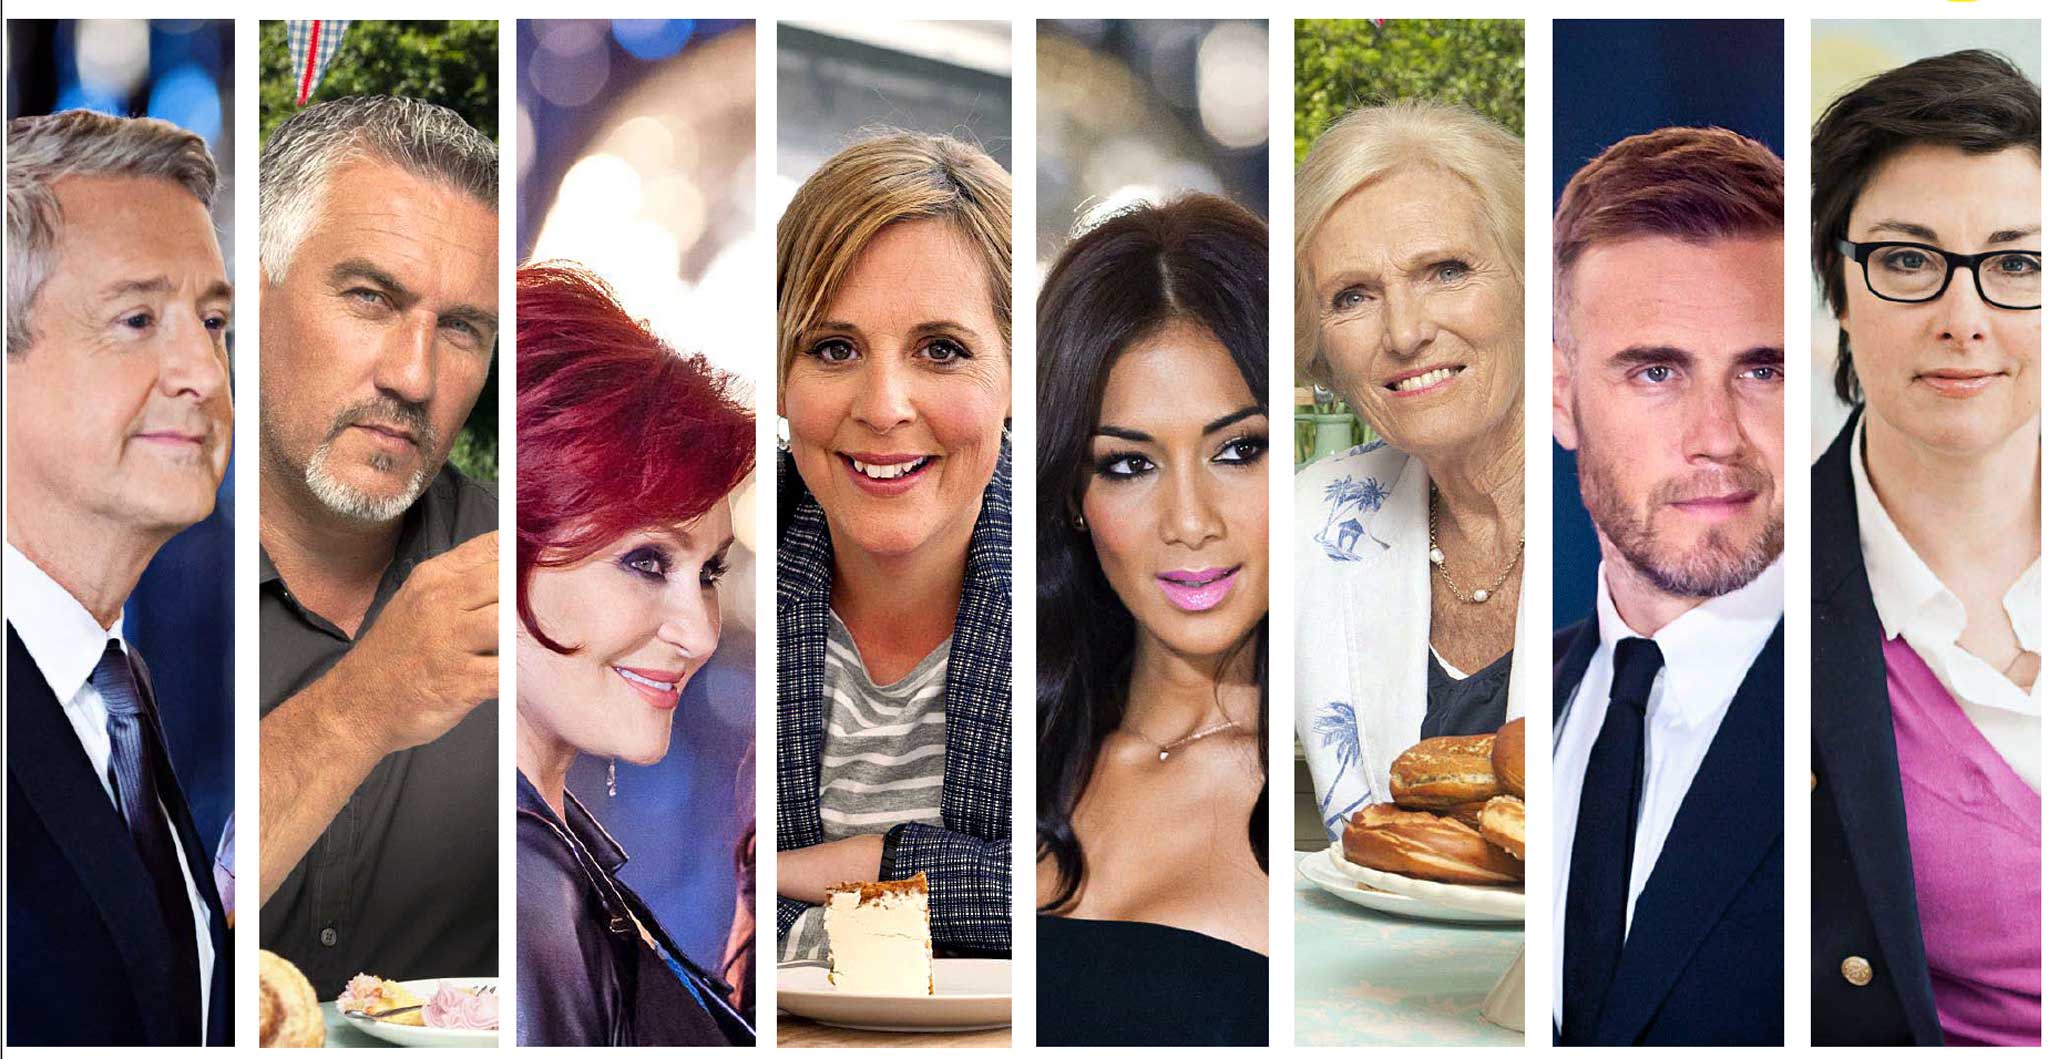 The judges on The British Bake Off are renowned for their soft touch, making a distinct comparison between some of the judges on shows such as X-Factor